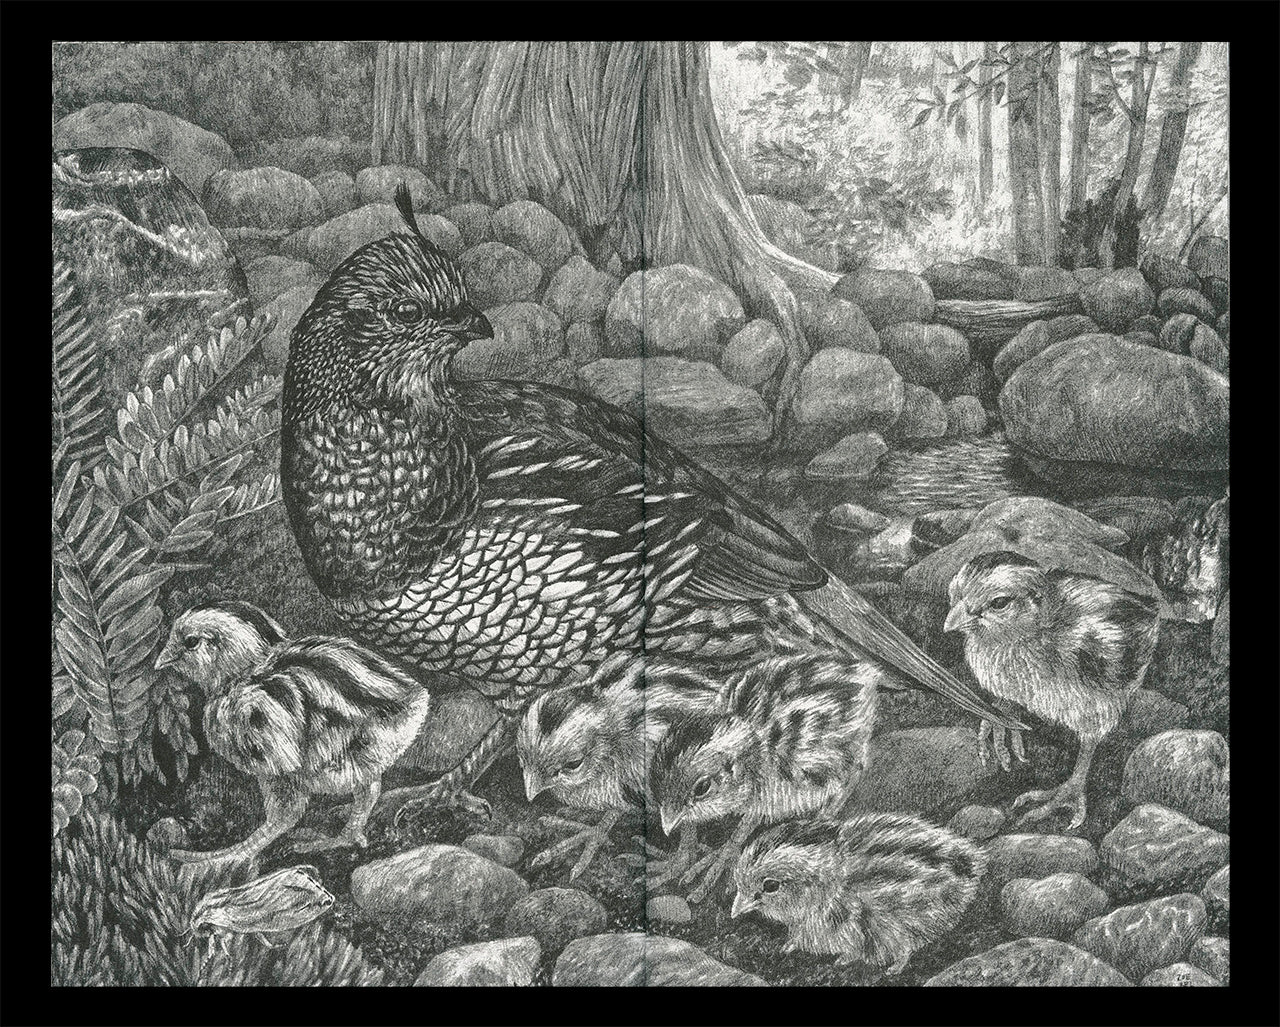 Interior spread of Zoe Keller's zine "Drawings" showing a graphite drawing of a quail family in the woods